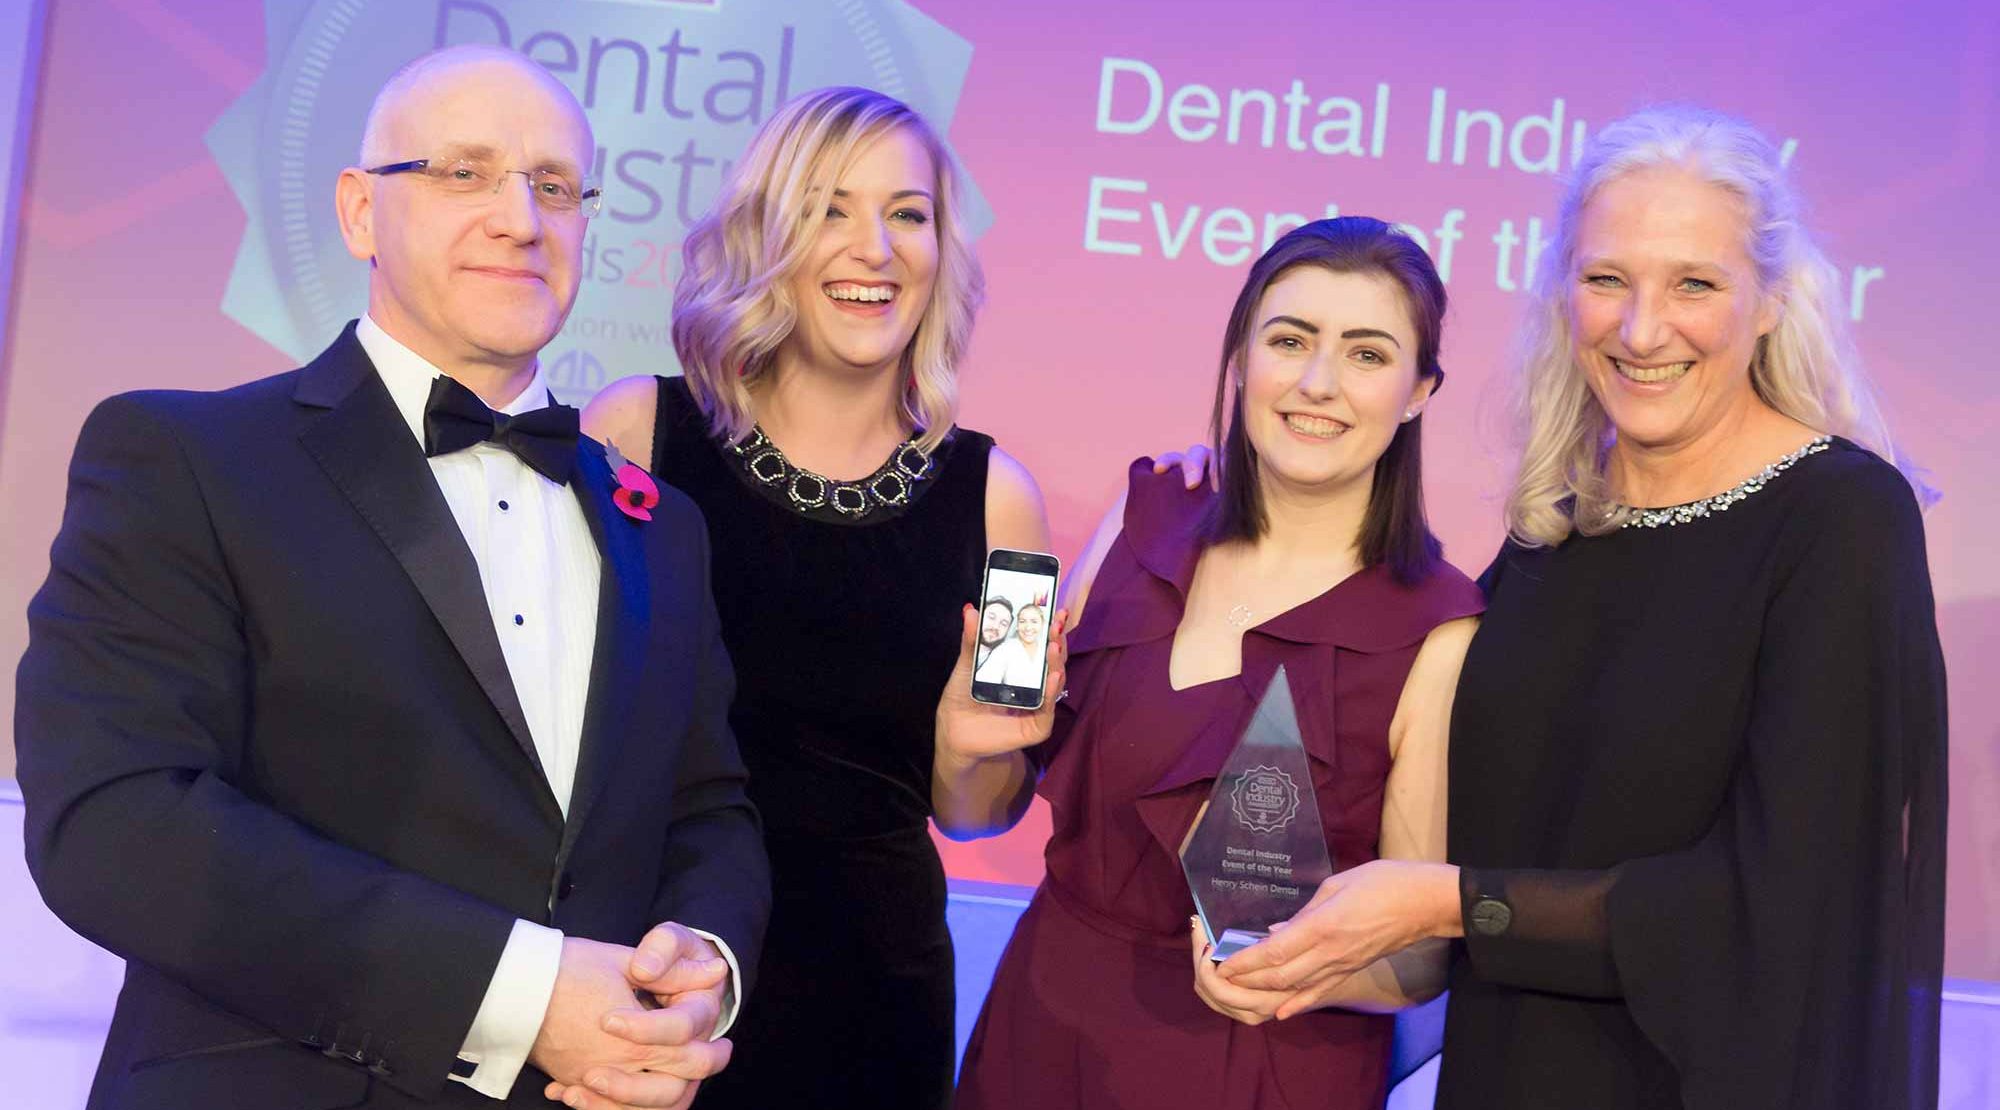 Dental Industry Awards 2019 Event of the Year